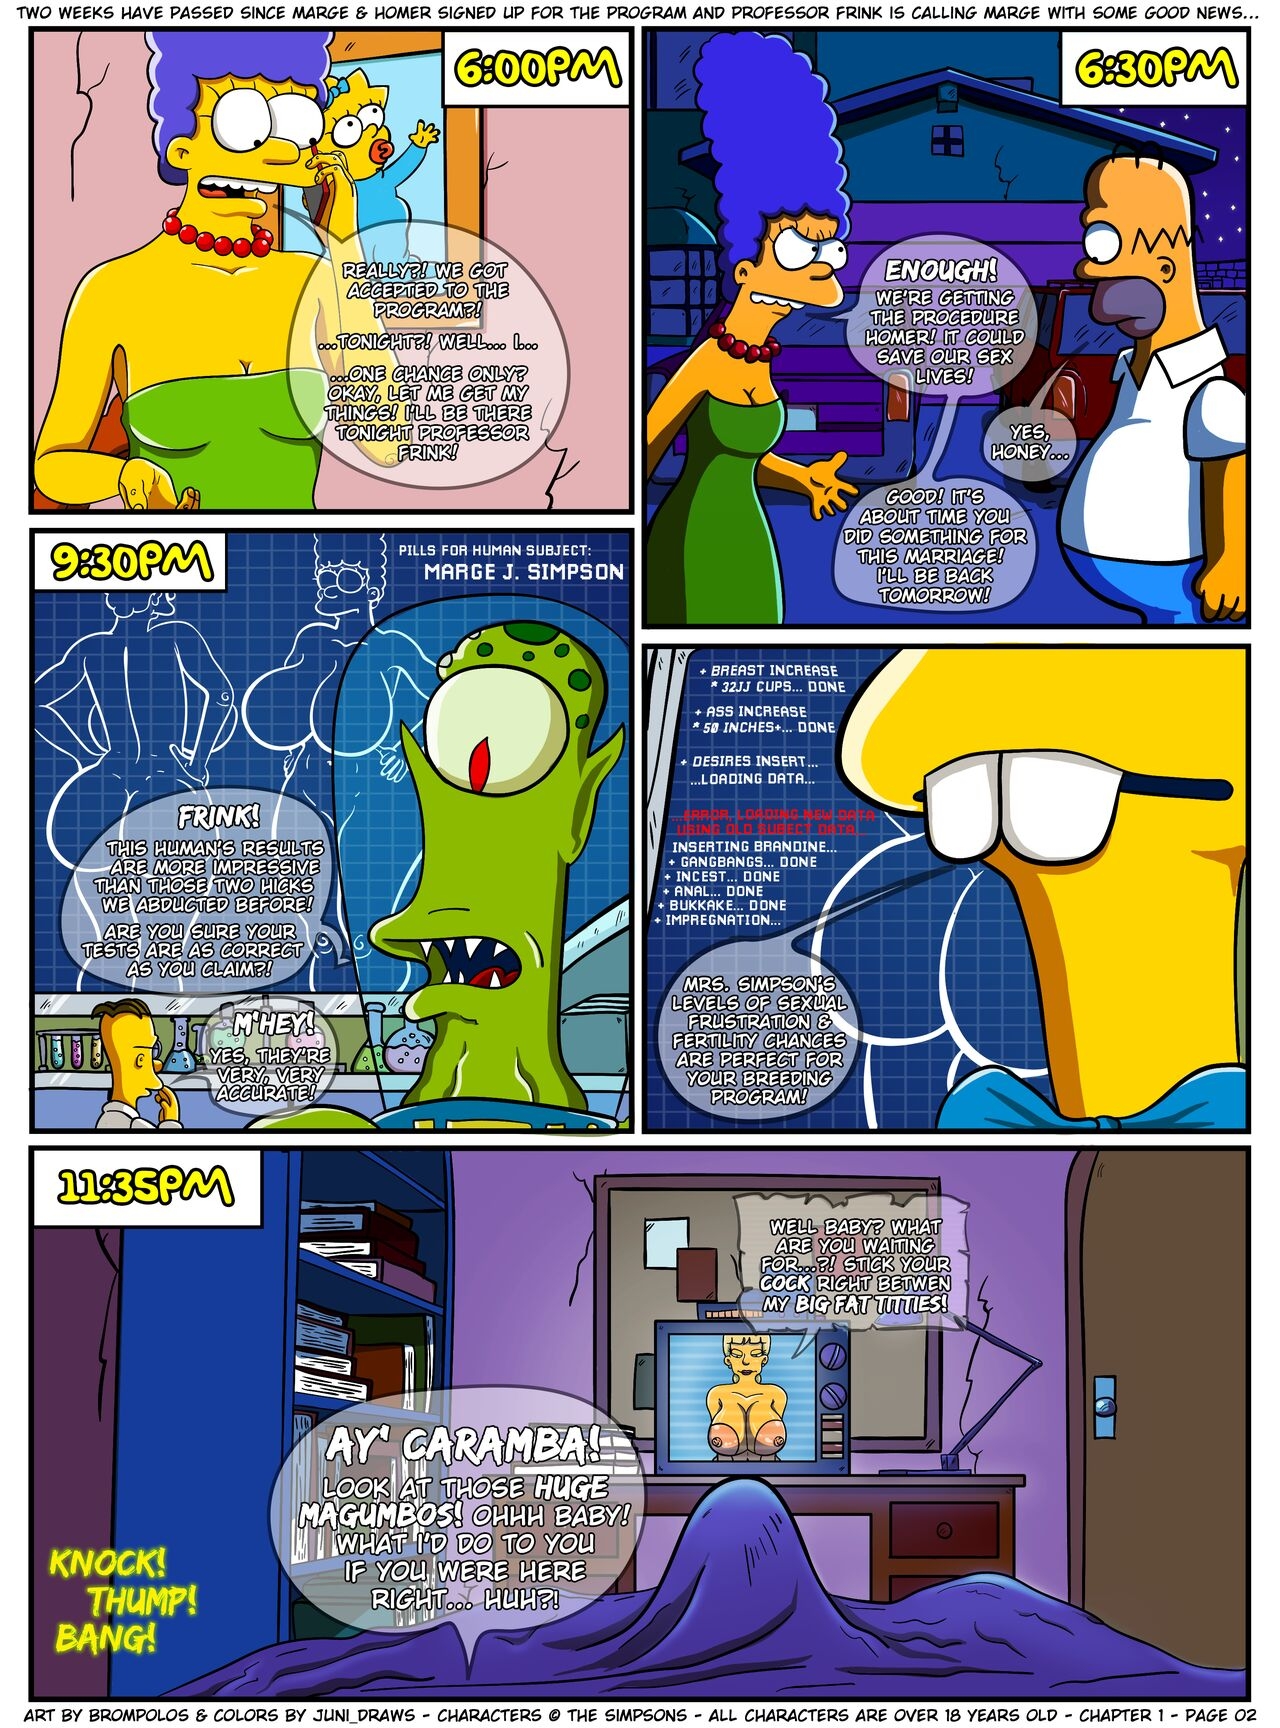 [Brompolos/Juni_Draws] The Sexensteins (Simpsons) [Ongoing] 2